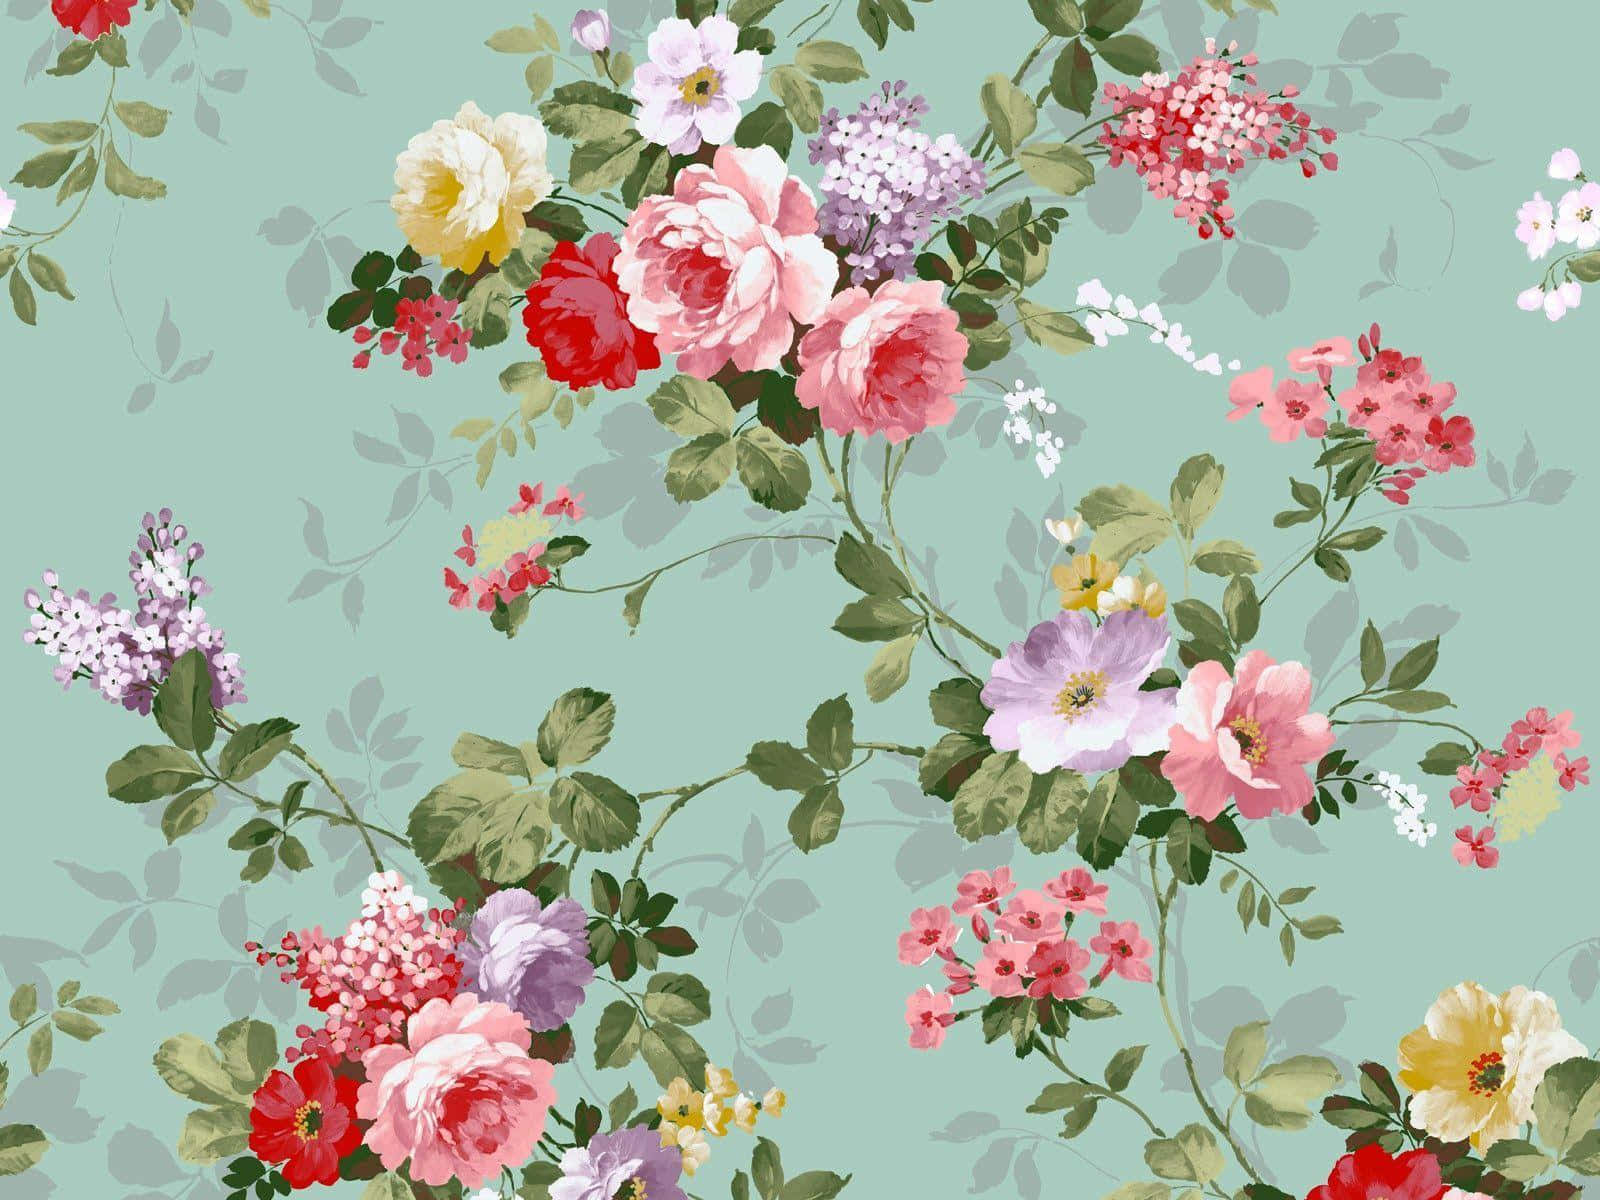 Celebrate beauty and elegance with this Vintage Flower background